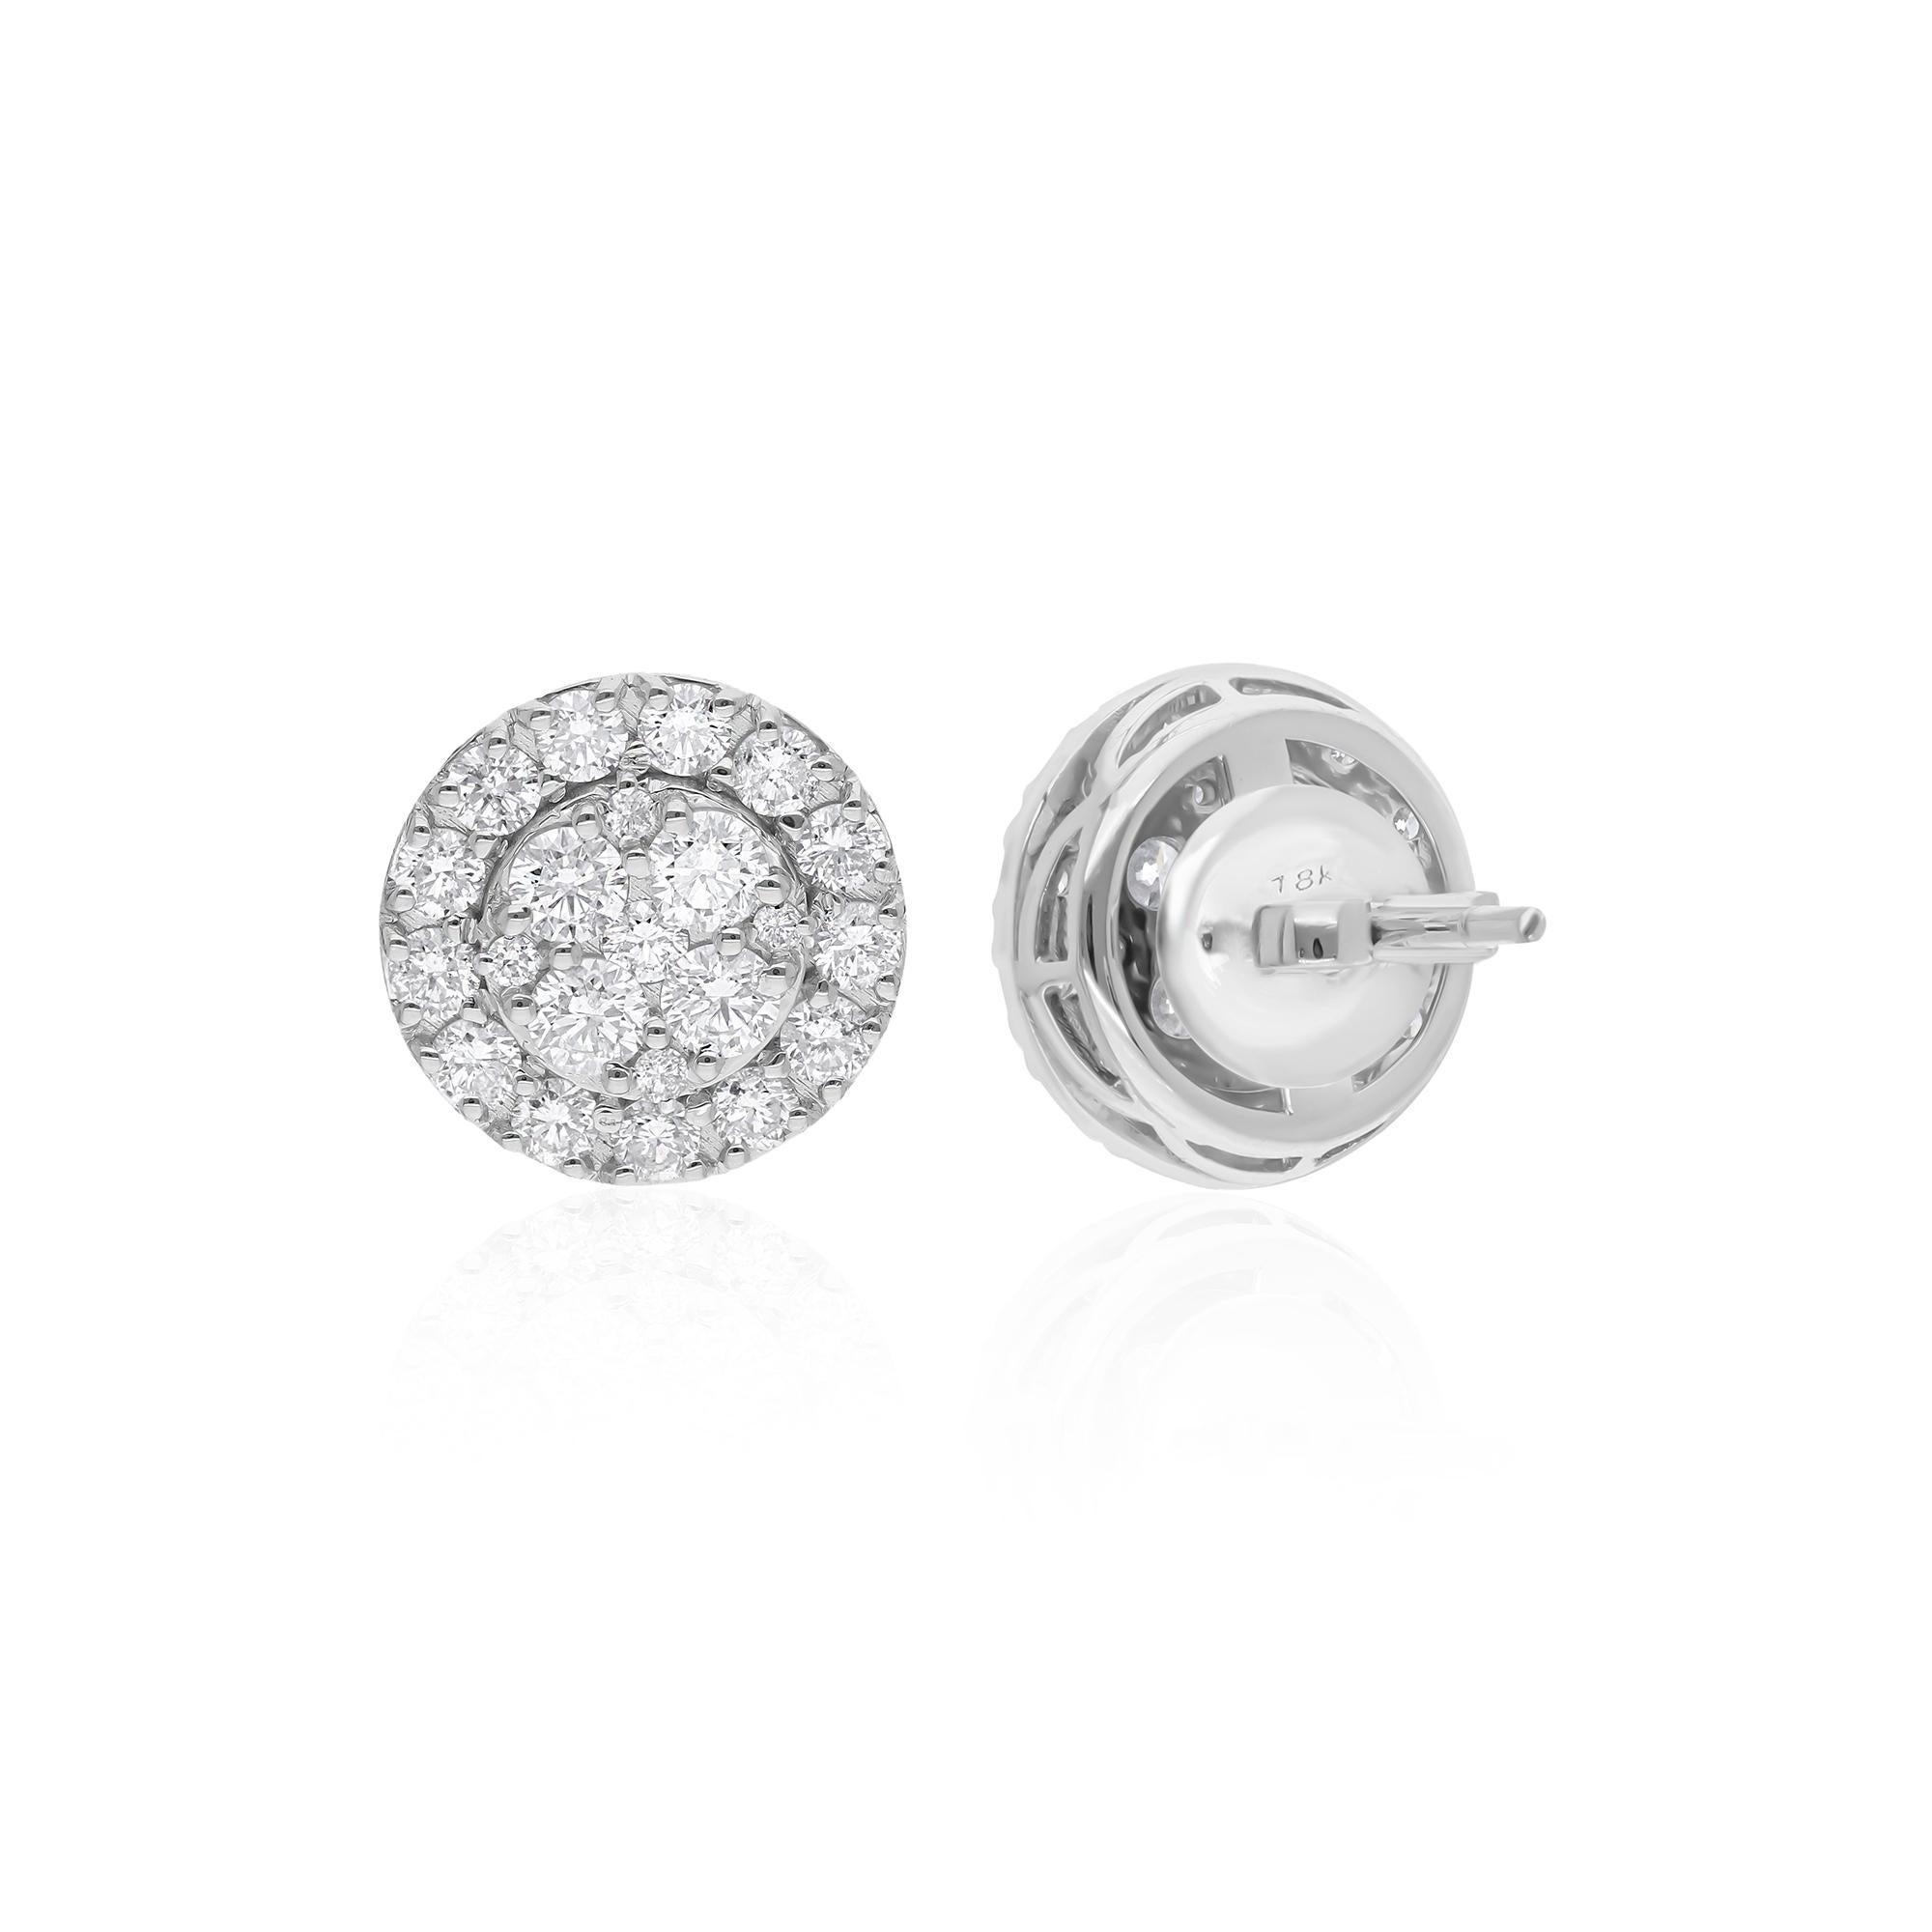 Indulge in timeless elegance with these exquisite diamond stud earrings, featuring a stunning pair of round-cut diamonds totaling 1.97 carats. Each diamond boasts a sparkling brilliance that captivates the eye and radiates luxury. Set in lustrous 18